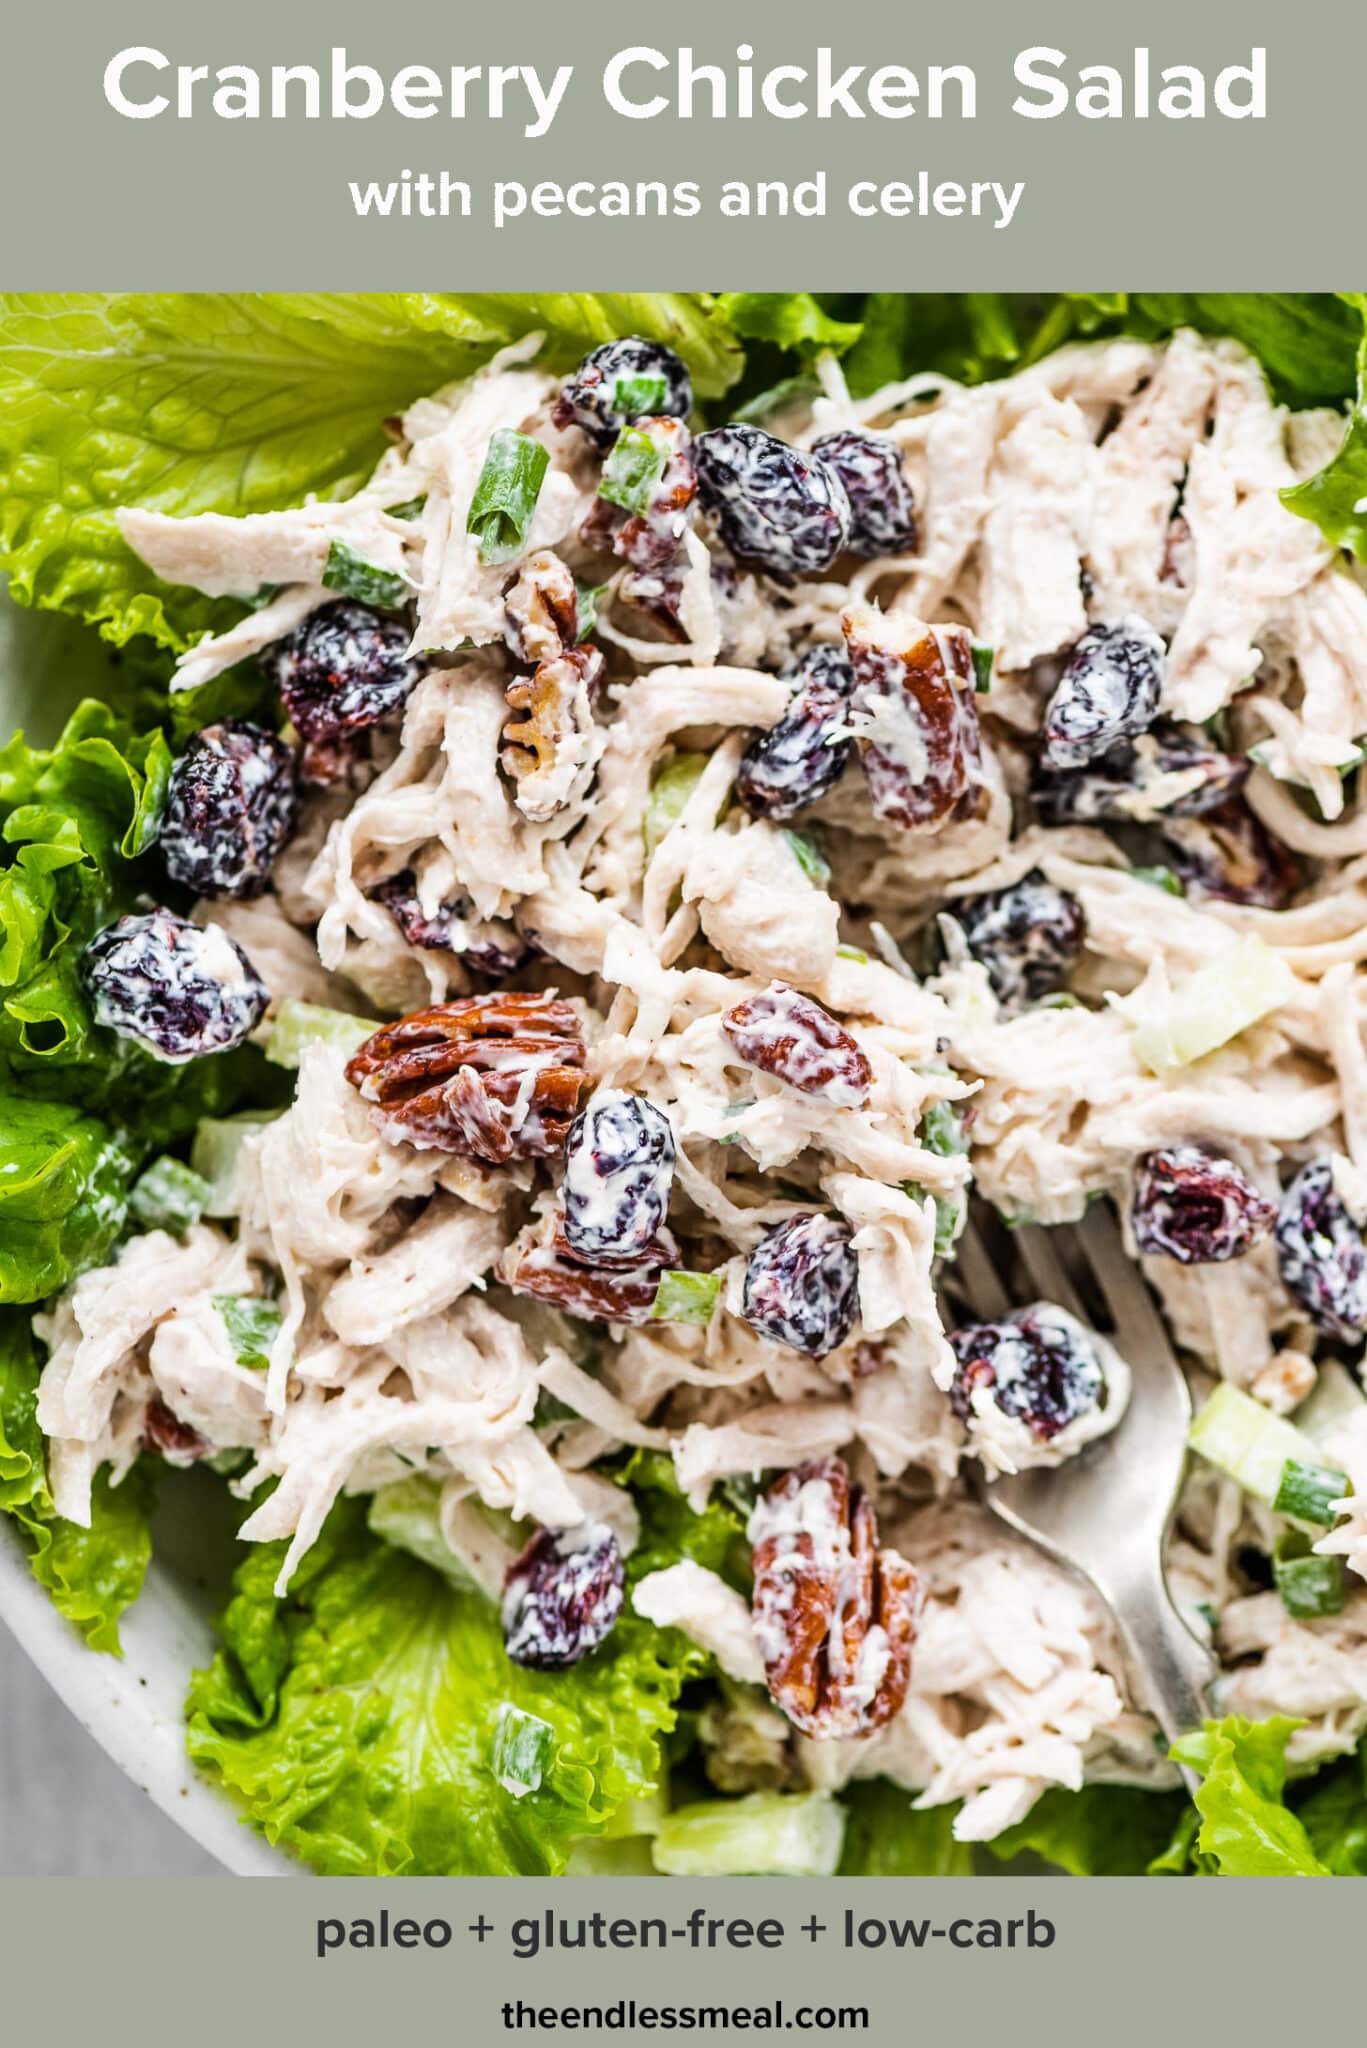 Cranberry chicken salad on a bed of greens with the recipe title on top of the picture.